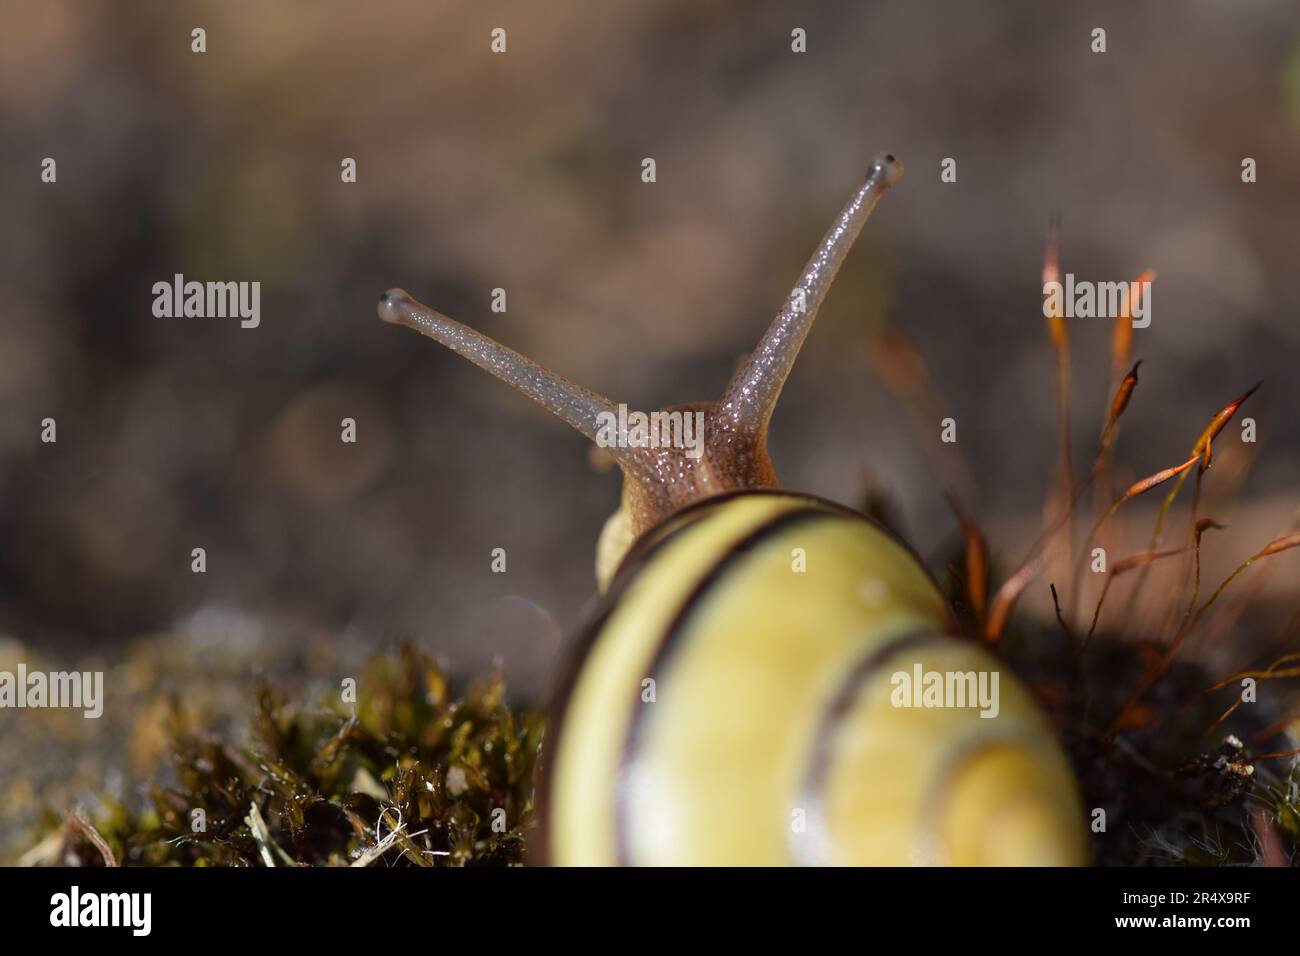 macro shot of a snail with a shell from behind Stock Photo